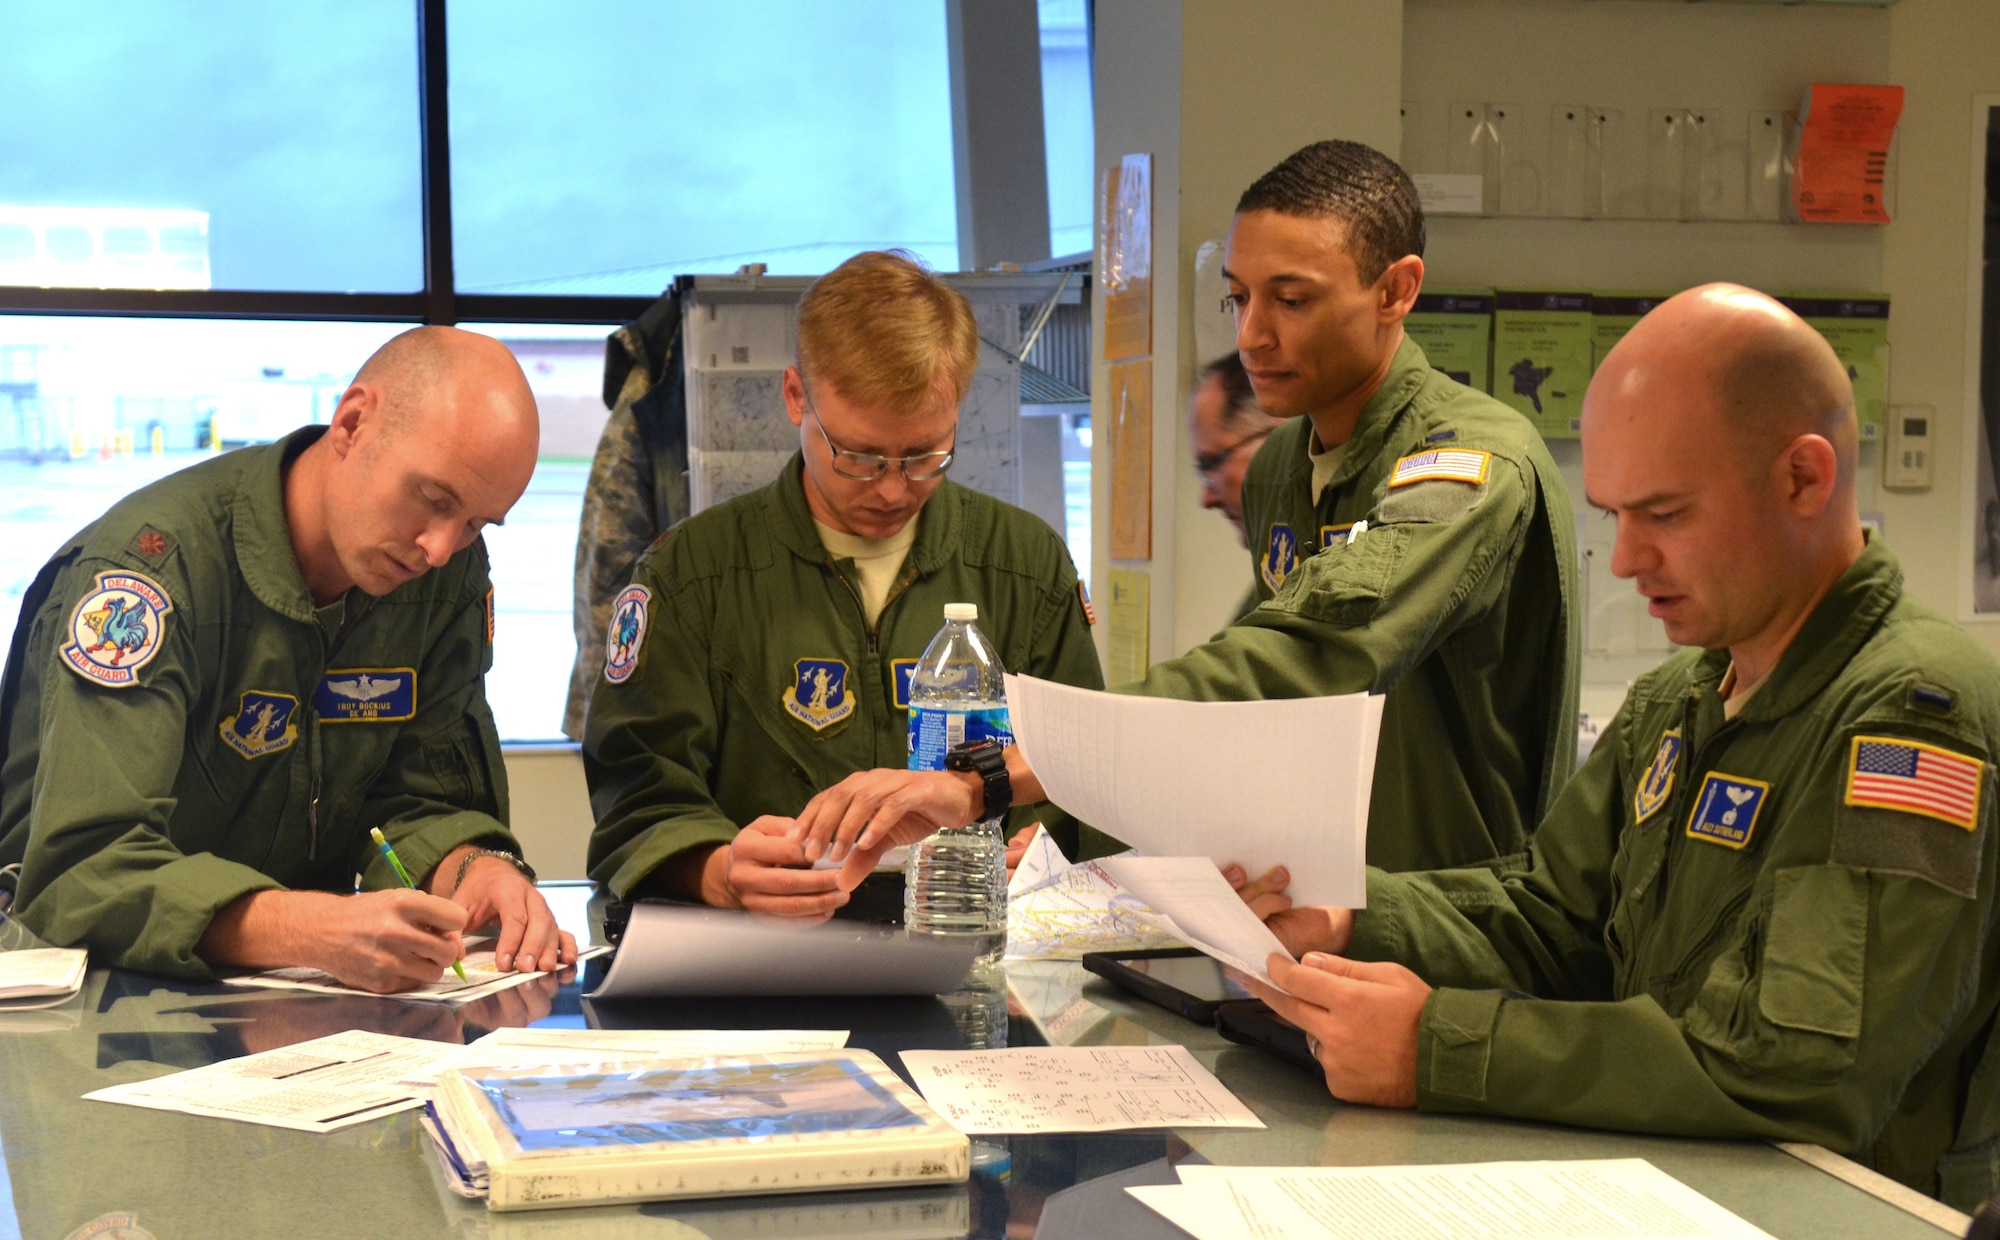 Pilot and mission commander U.S. Air Force Maj. Troy Bockius, combat systems officer (CSO) Maj. Roy Shoppert, pilot Lt. Col. J.D. Davis (background), pilot 1st Lt. Chris Farrell and CSO 1st Lt. Alex Sutherland, all from the 142nd Airlift Squadron, 166th Airlift Wing, Delaware Air National Guard at a mission planning meeting for a two-ship C-130H formation and airdrop mission on Oct. 22, 2014 at the New Castle ANG Base, Del. (U.S. Air National Guard photo by Tech. Sgt. Benjamin Matwey)
